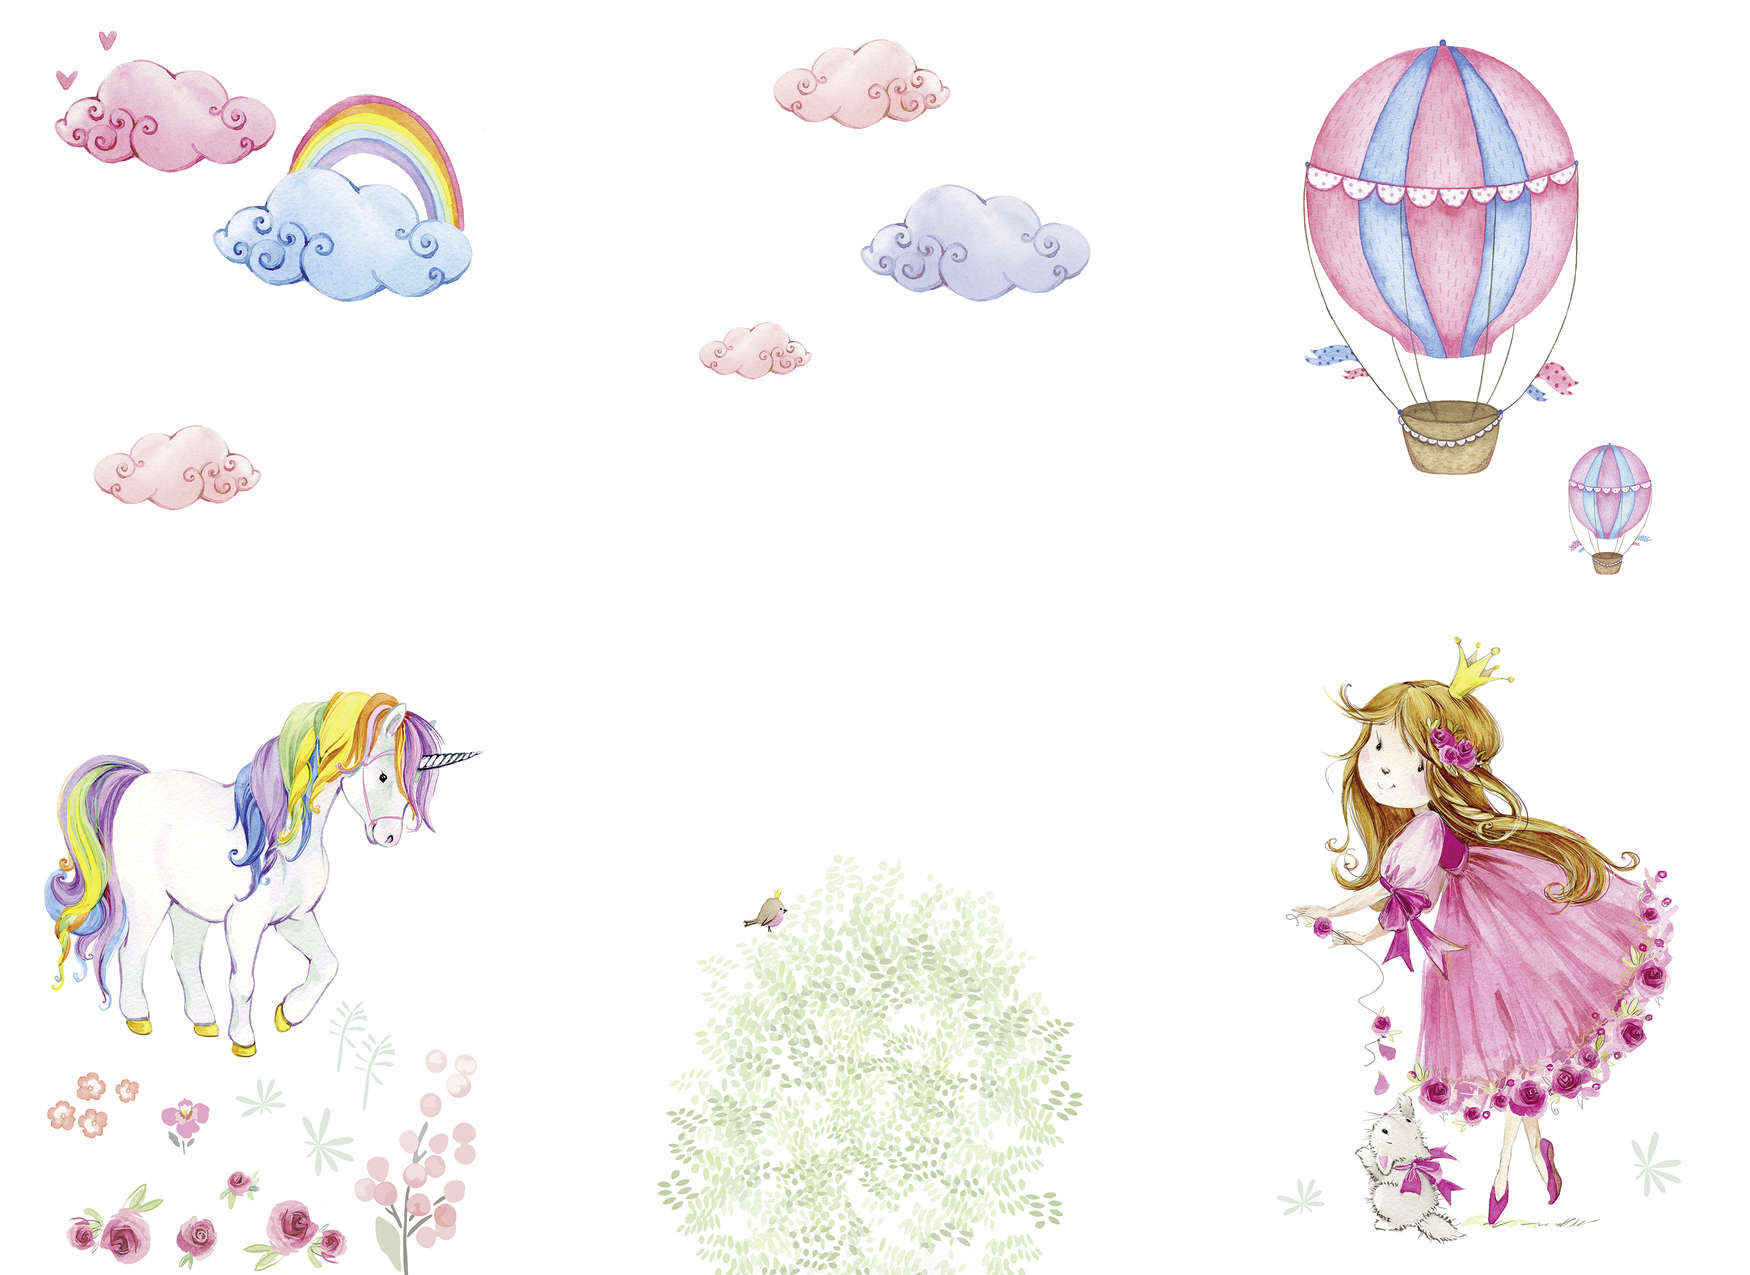             Nursery mural with princess and unicorn - Pink, Colourful, White
        